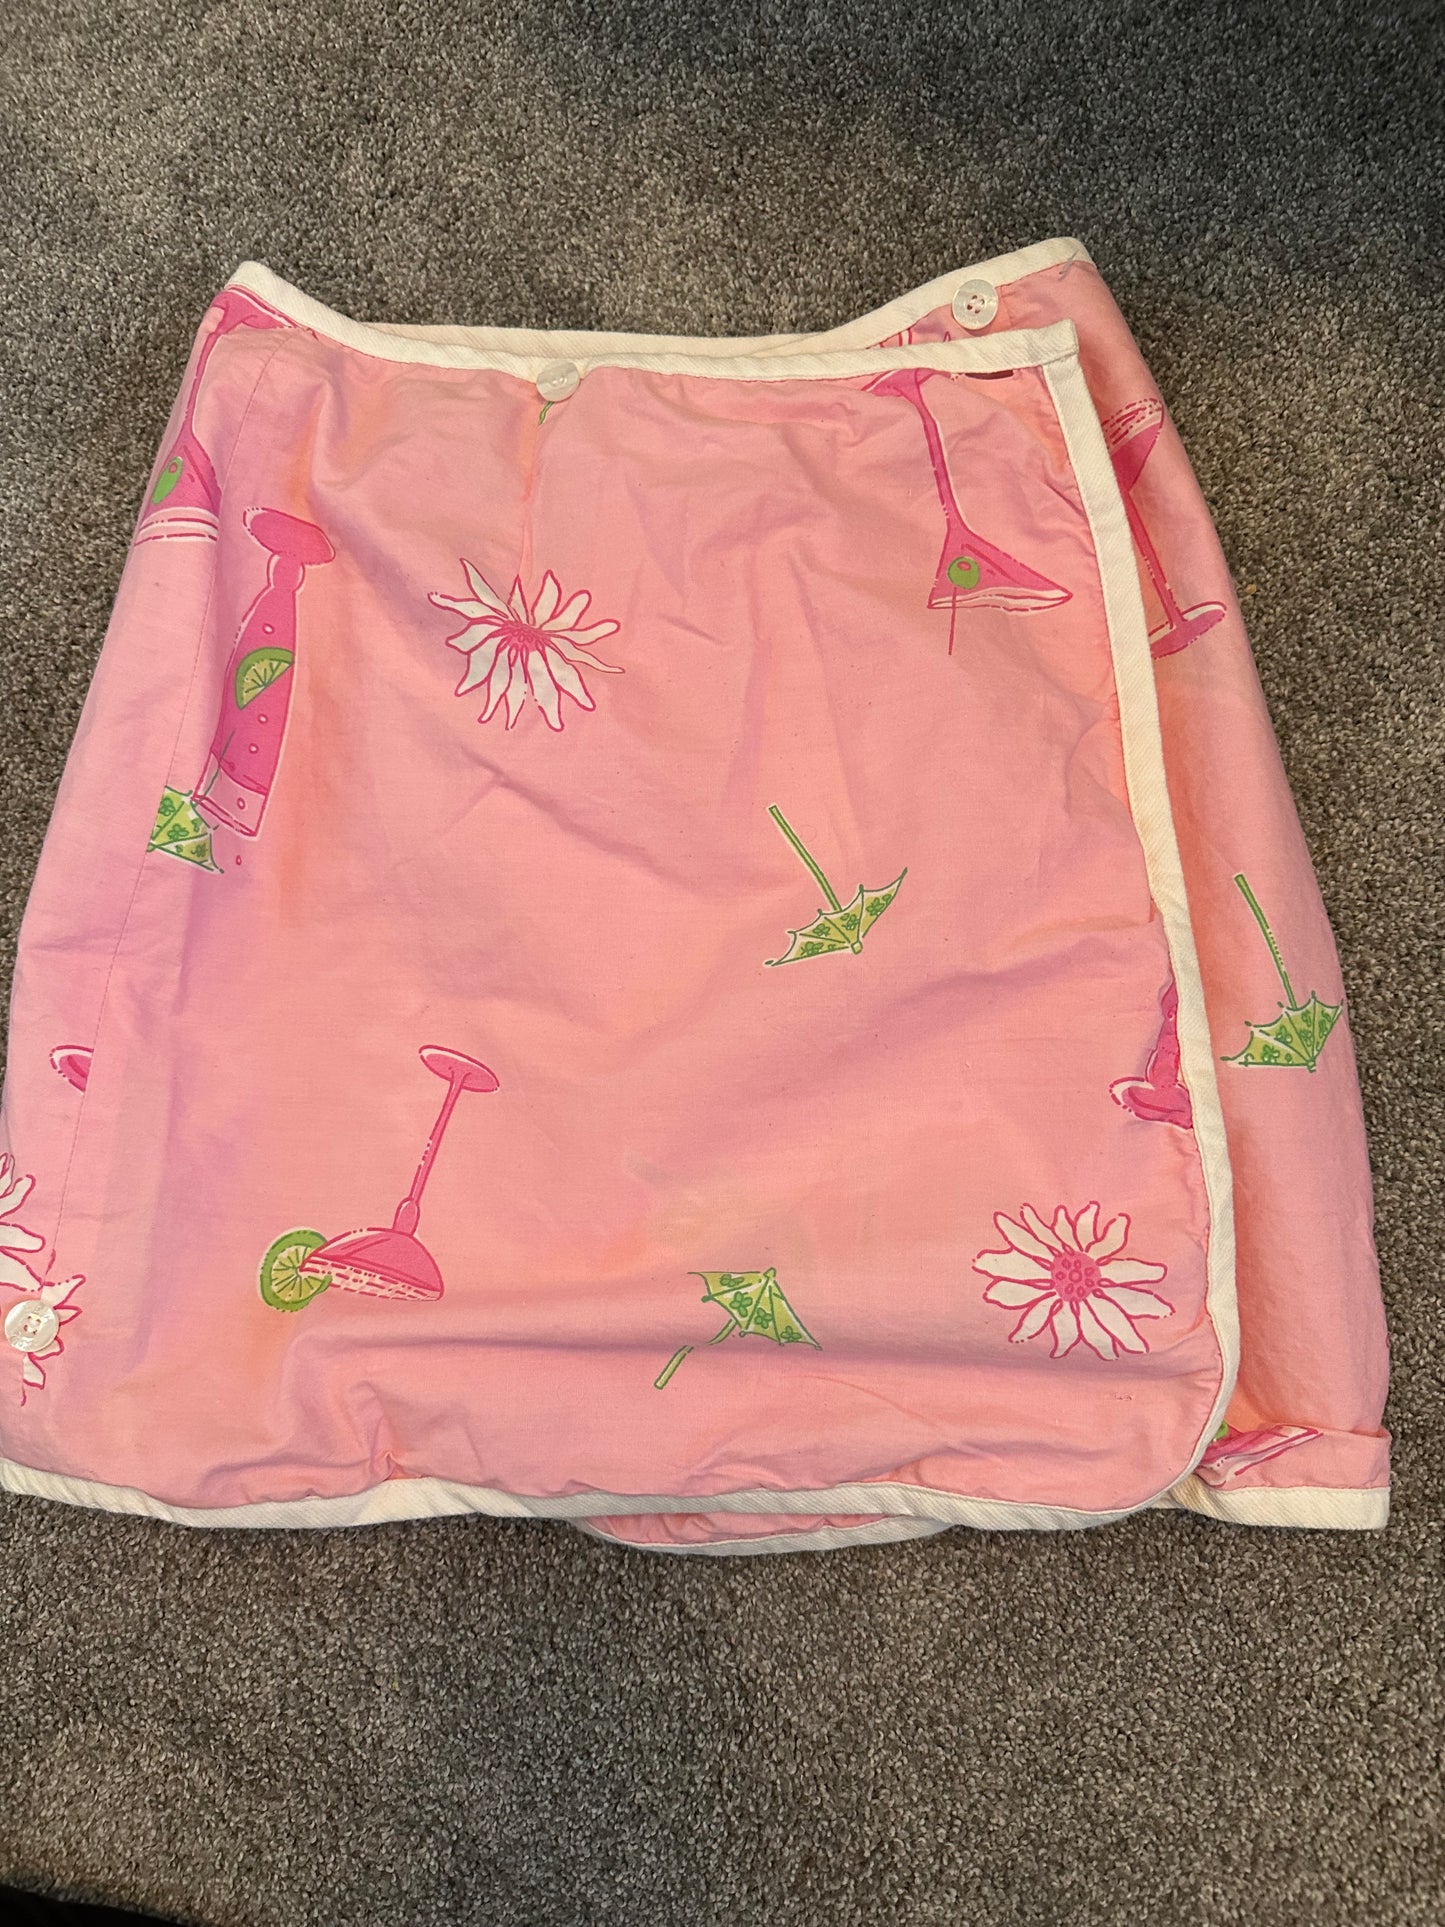 Lilly Pulitzer Sz 4 Reversible Pink Skirt